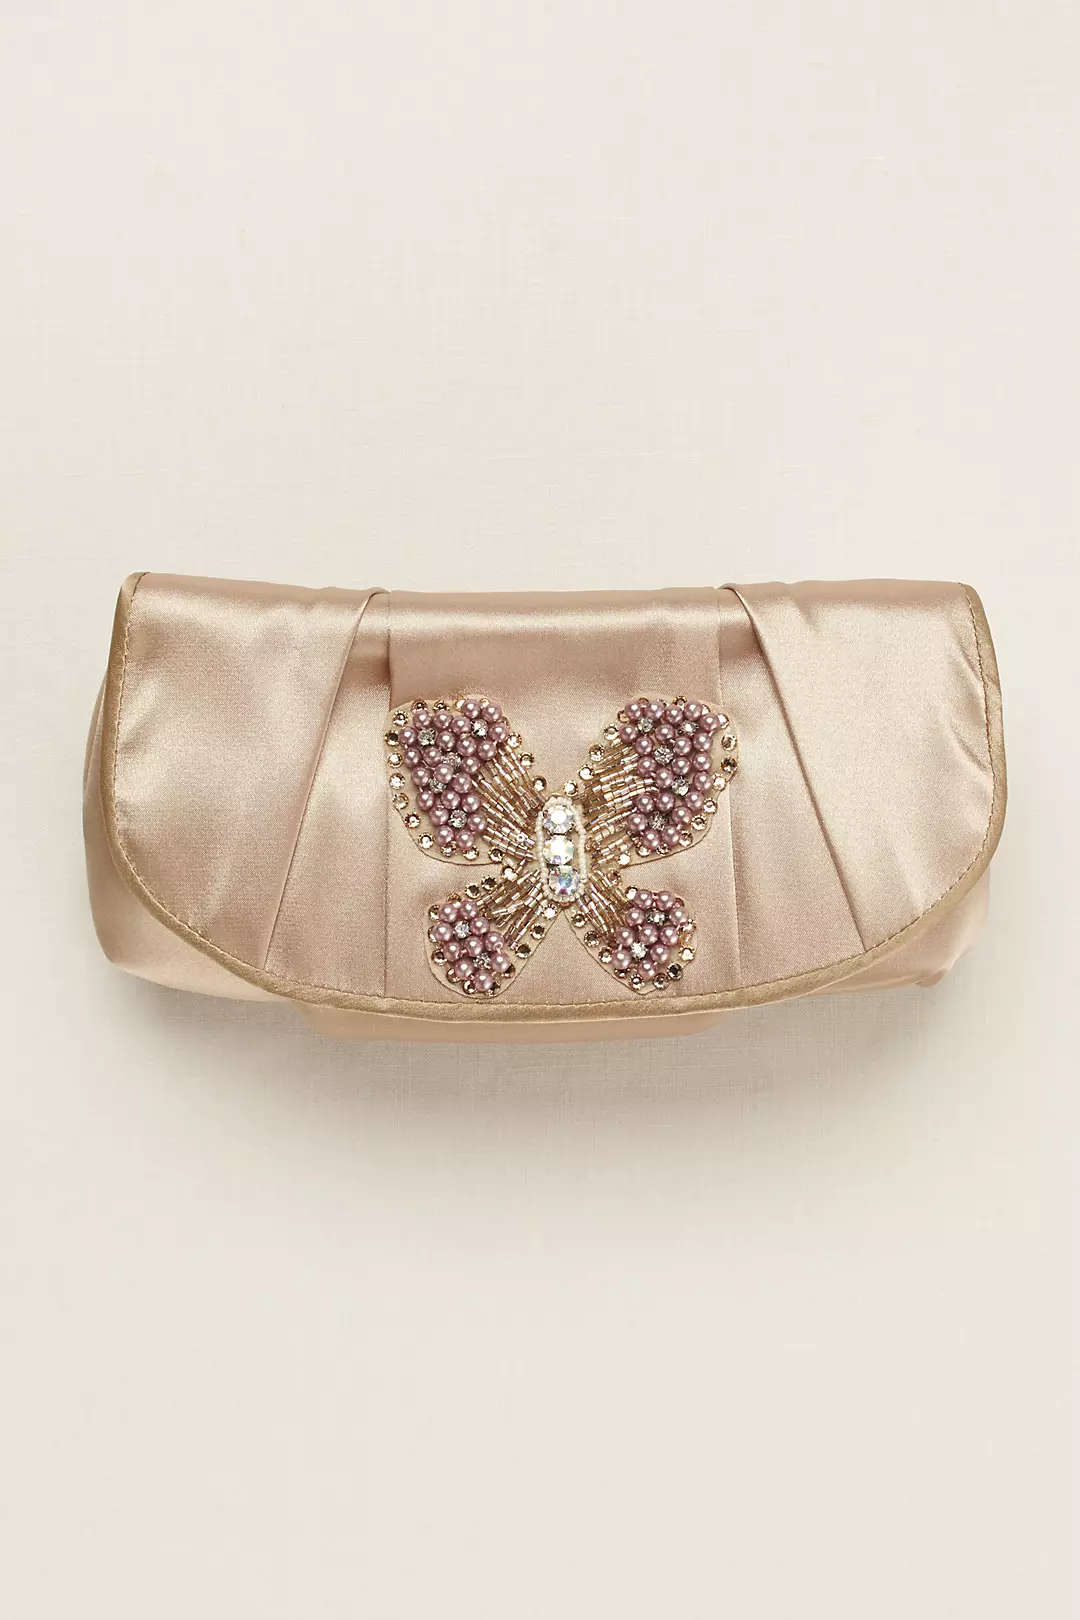 Satin Clutch with Butterfly Ornament by Menbur Image 1